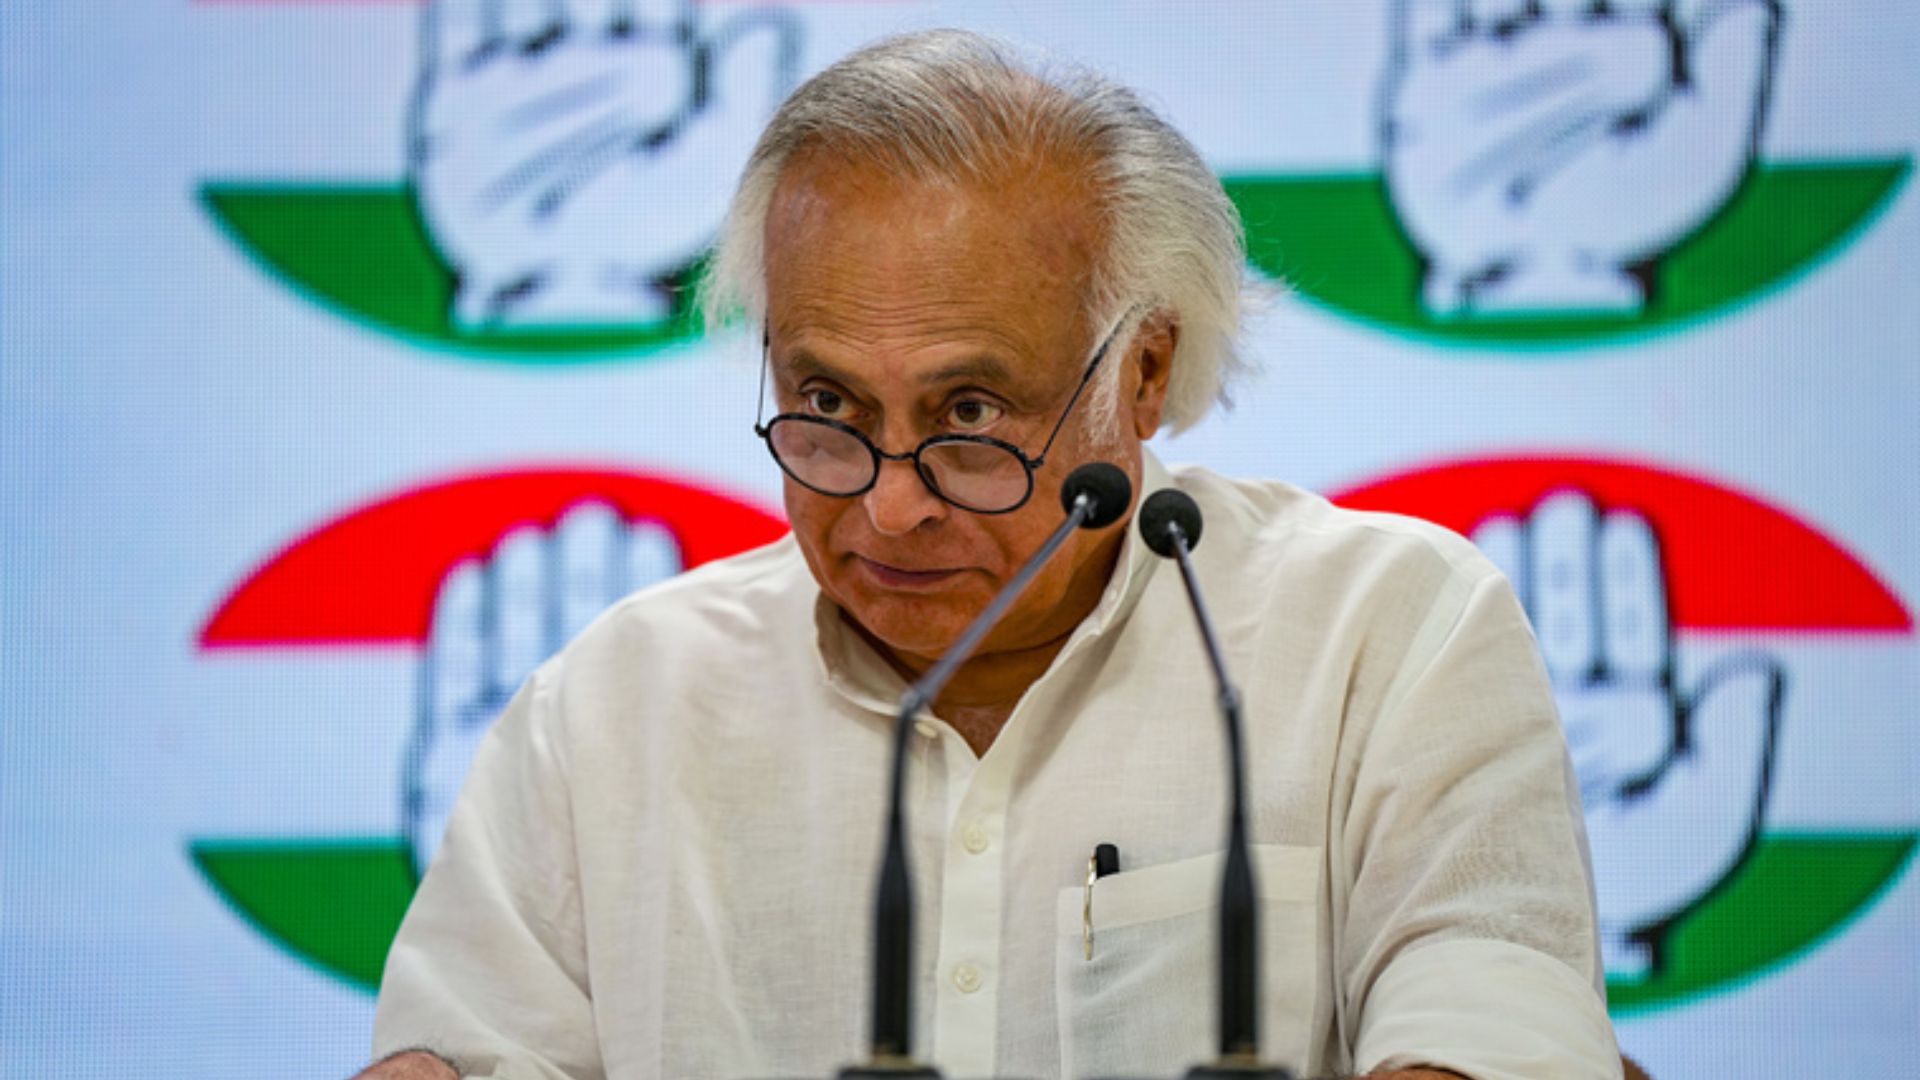 EC Rejects Jairam Ramesh’s Request For More Time To Detail Charges Against Amit Shah